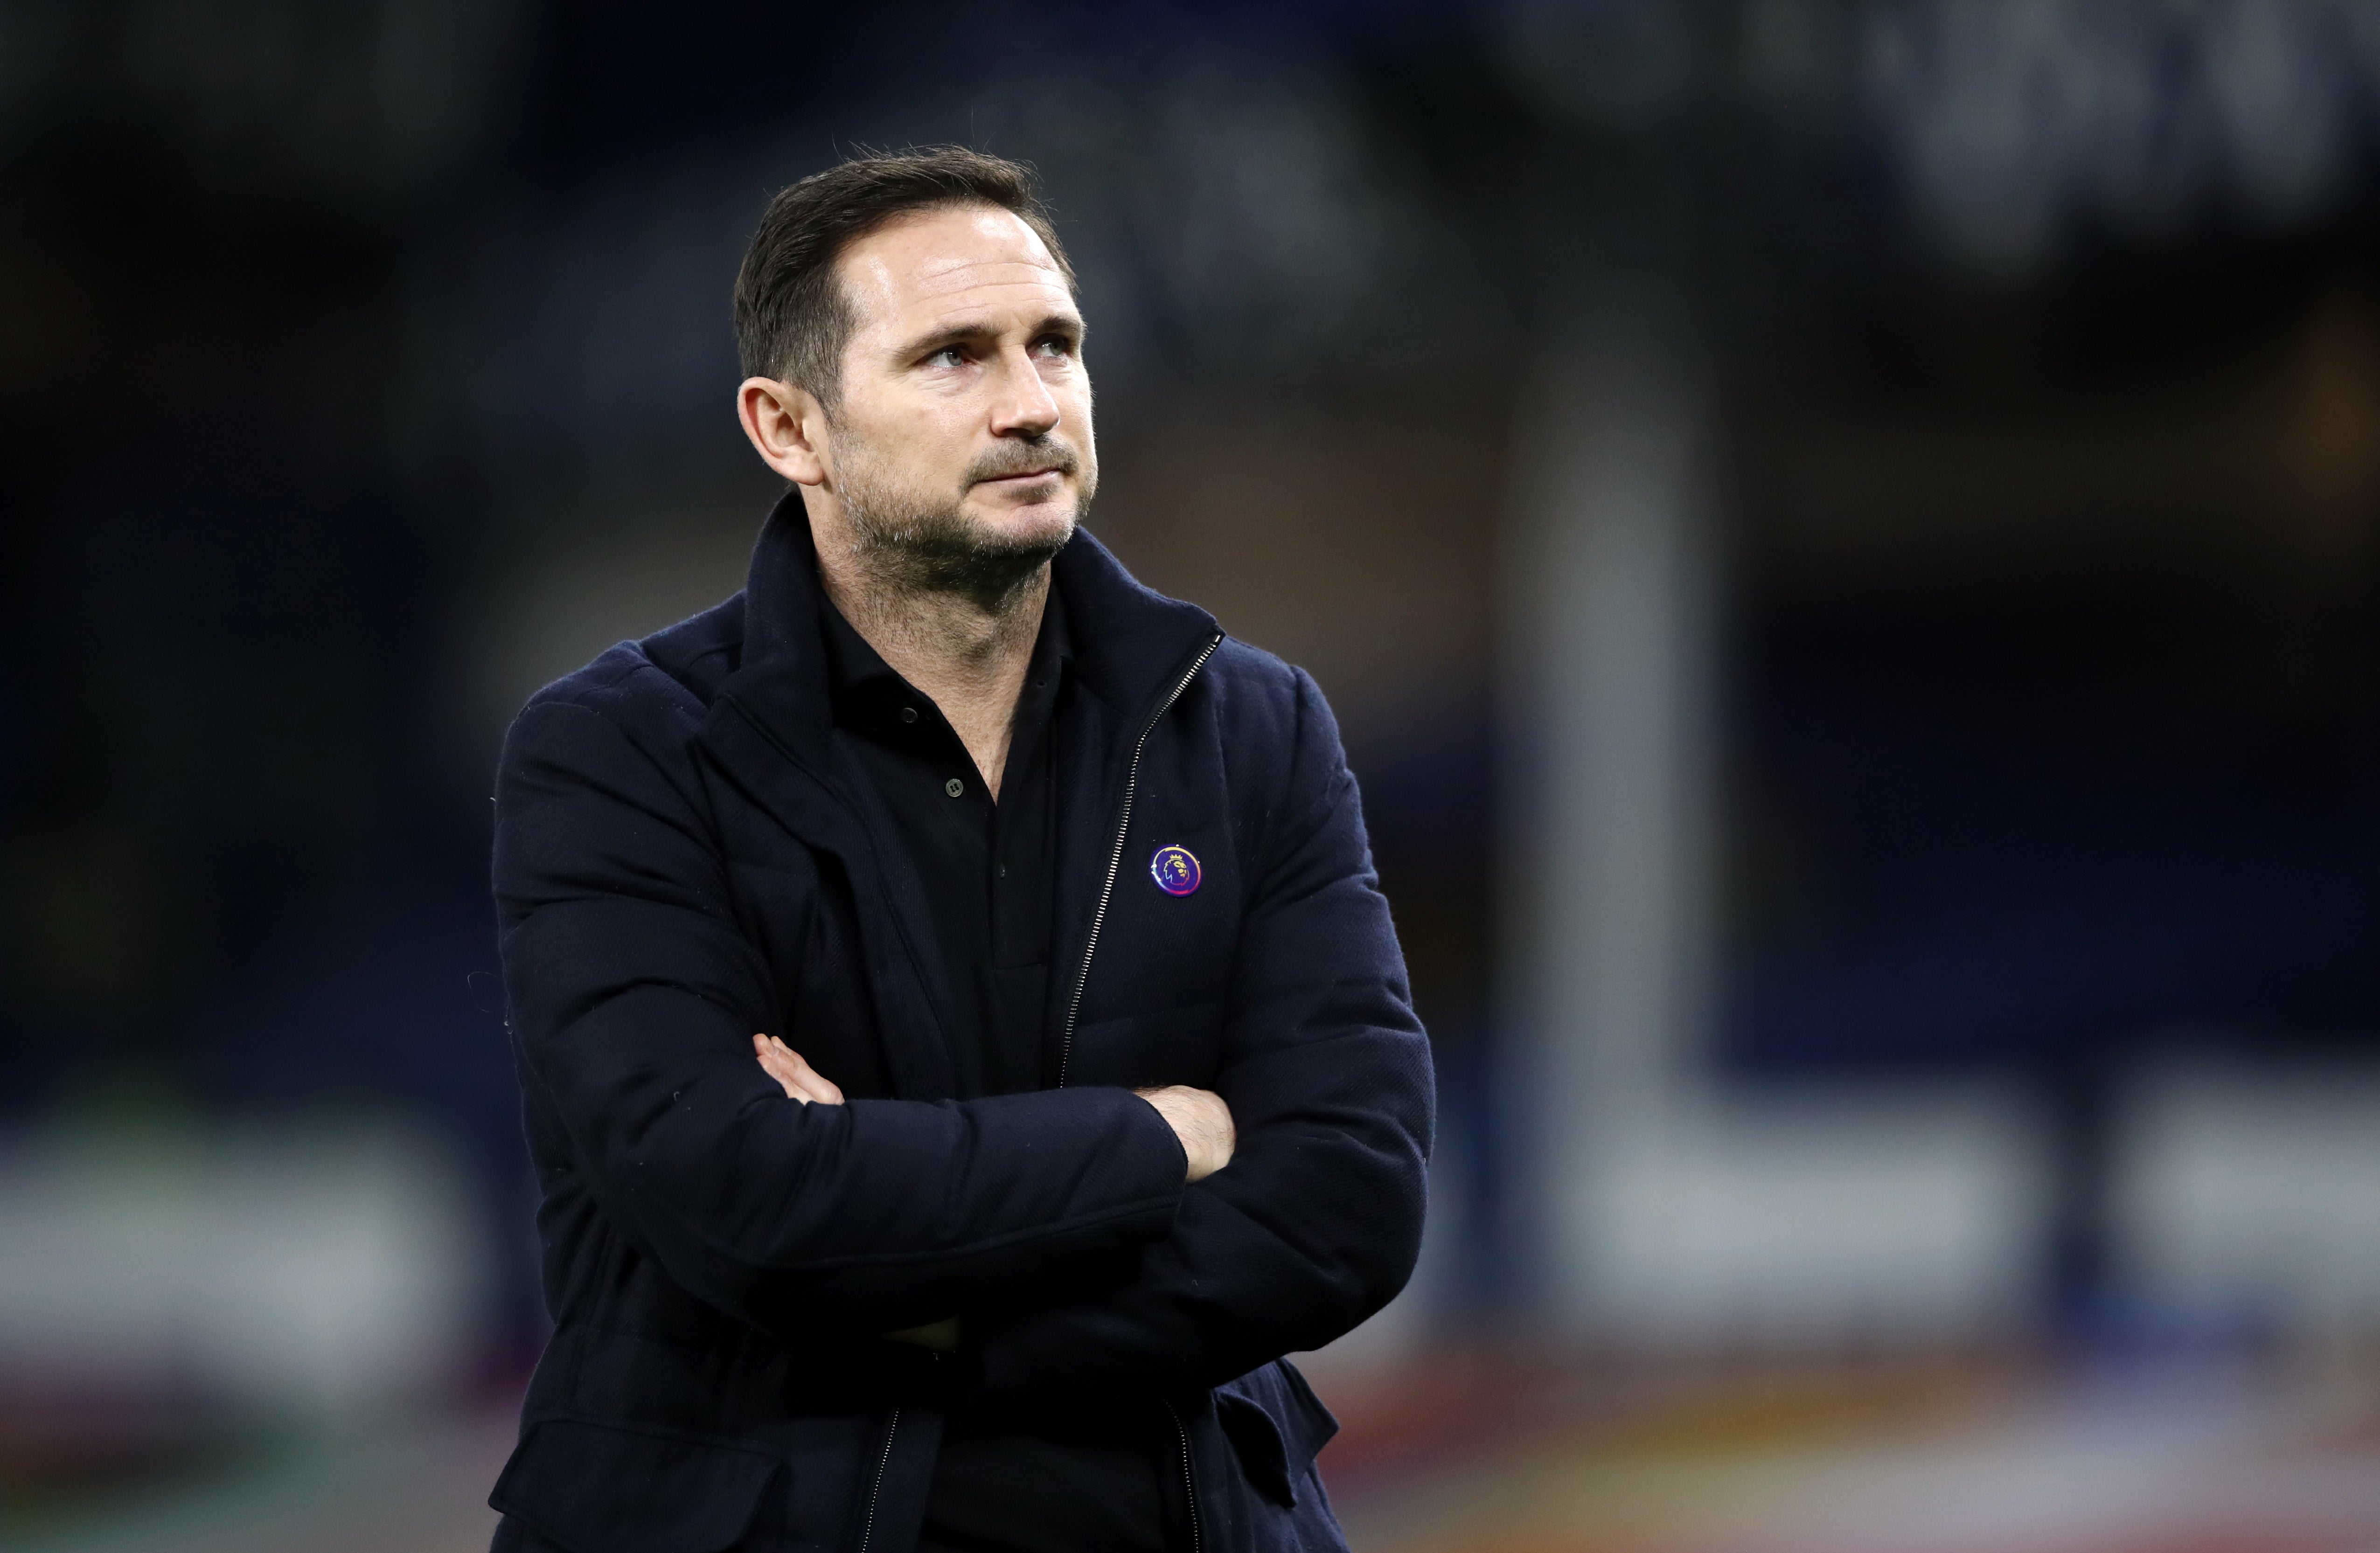 Former Derby and Chelsea boss Frank Lampard has been out of management for a year (Clive Brunskill/PA)